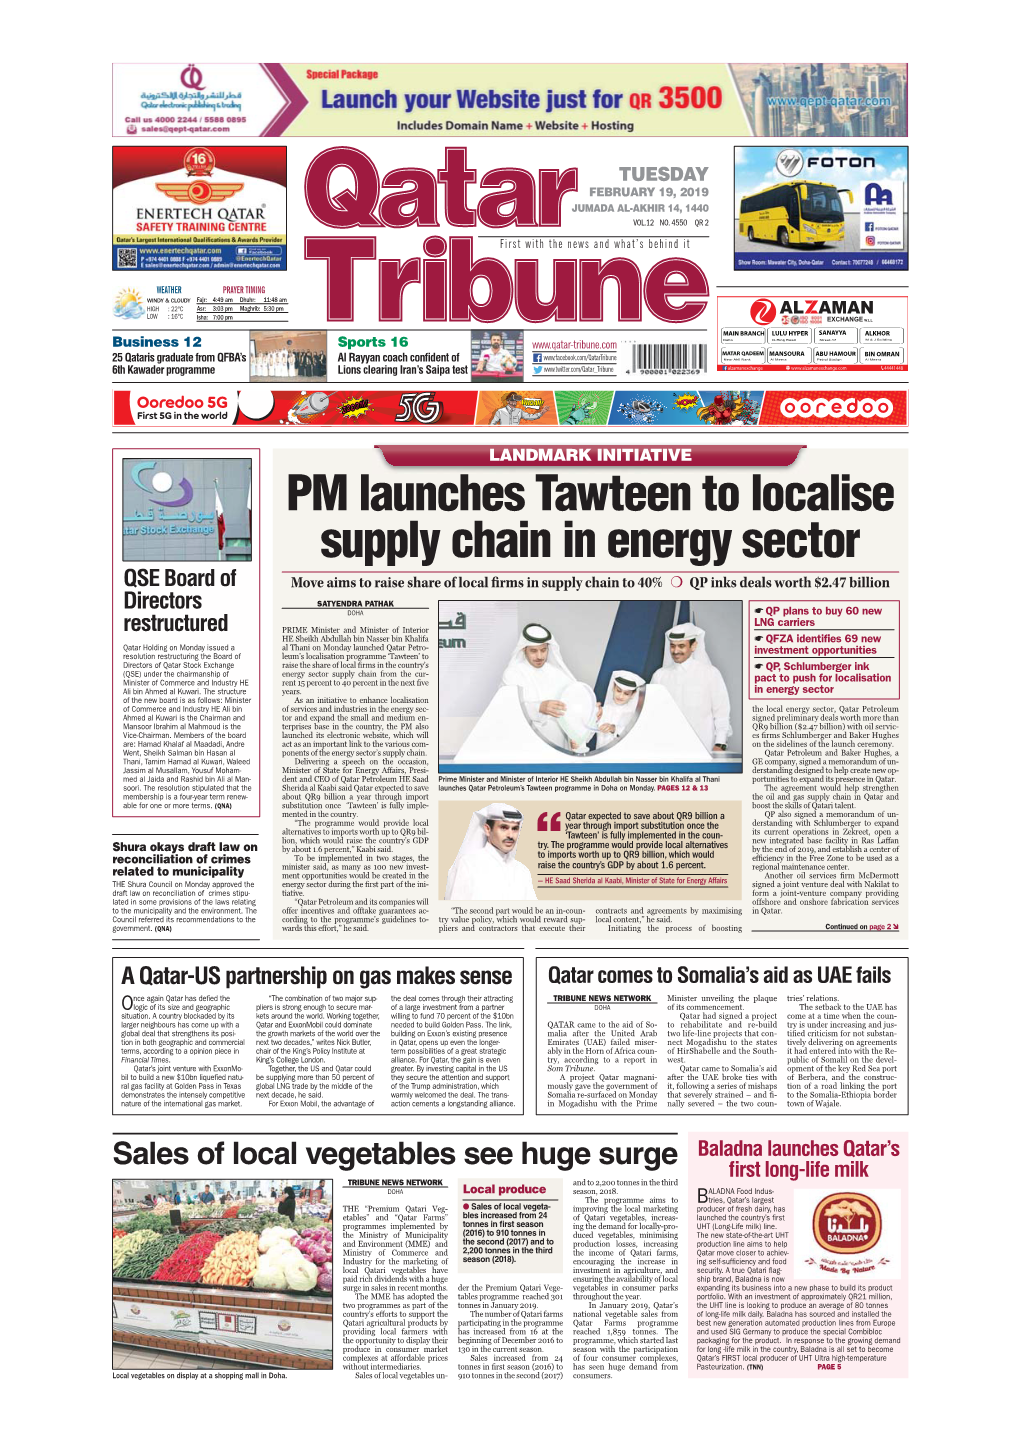 PM Launches Tawteen to Localise Supply Chain in Energy Sector